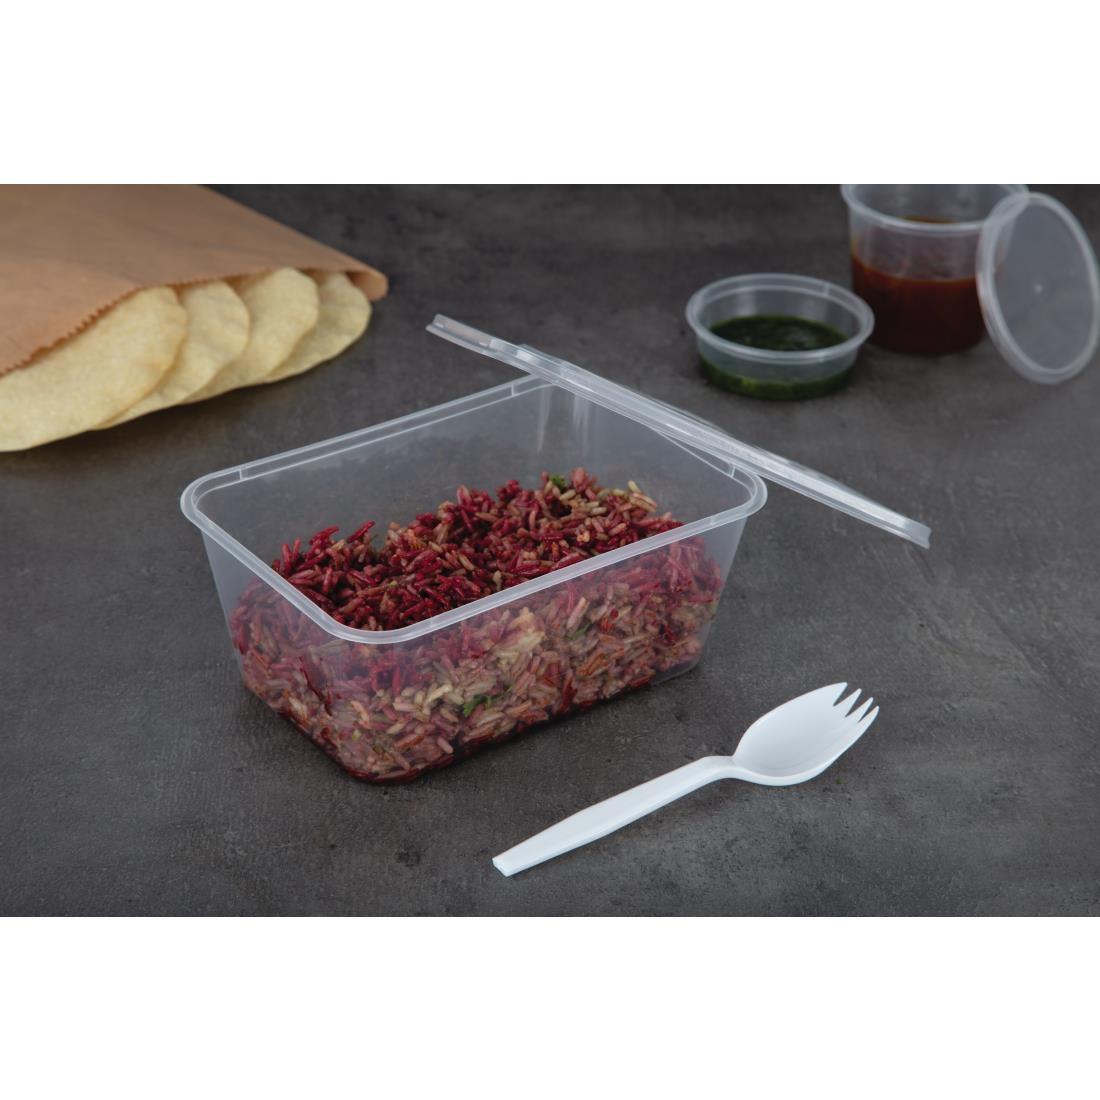 Fiesta Recyclable Plastic Microwavable Containers with Lid Large 1000ml (Pack of 250) - DM183  - 5